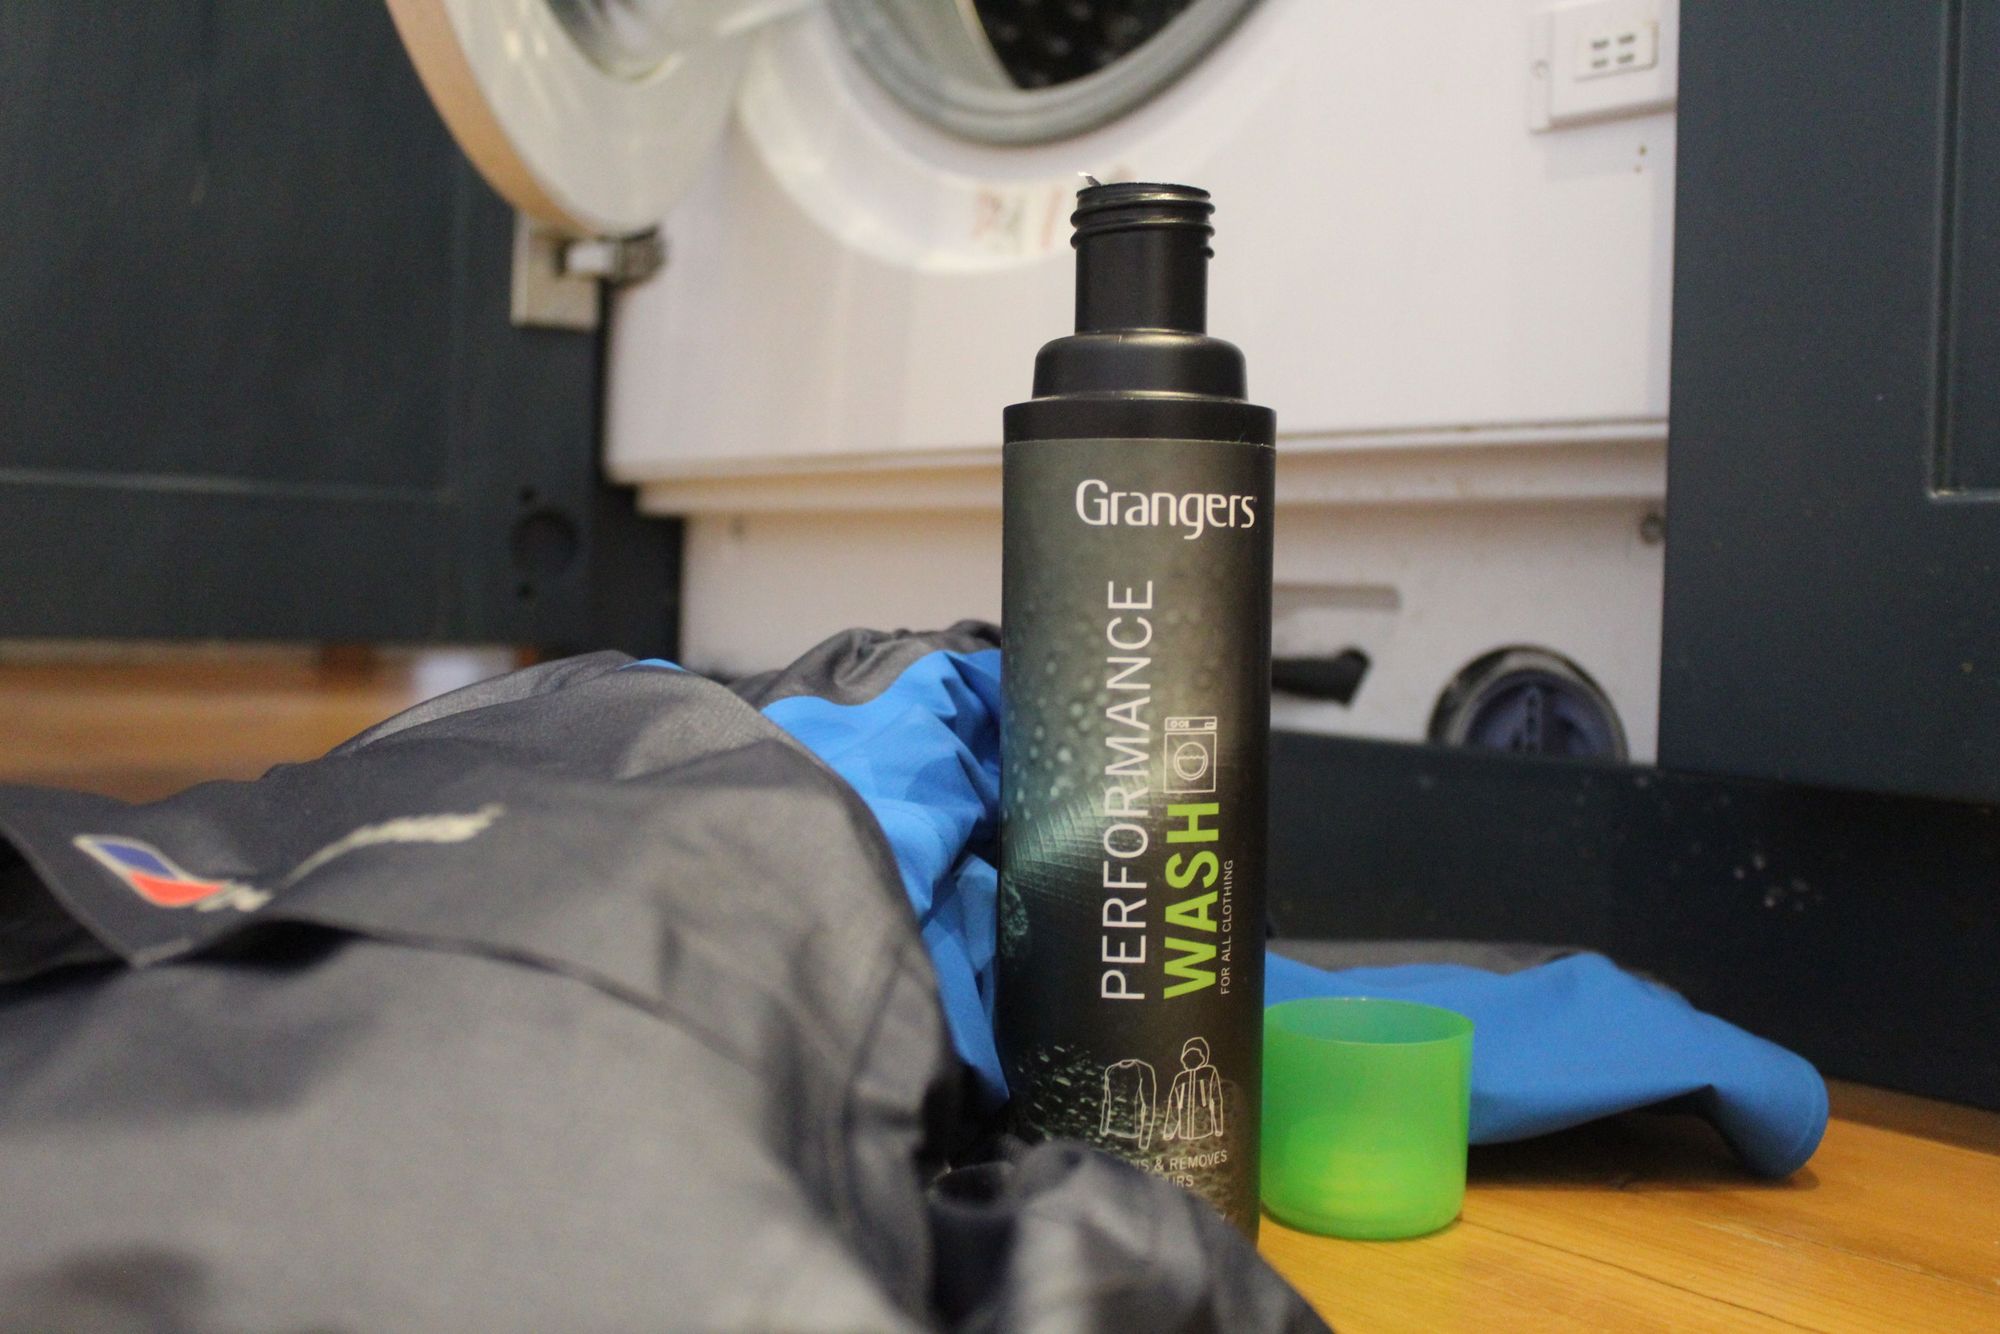 Back to that performance wash. Got to get those garments clean before you get them ready for proofing. Photo: Stuart Kenny